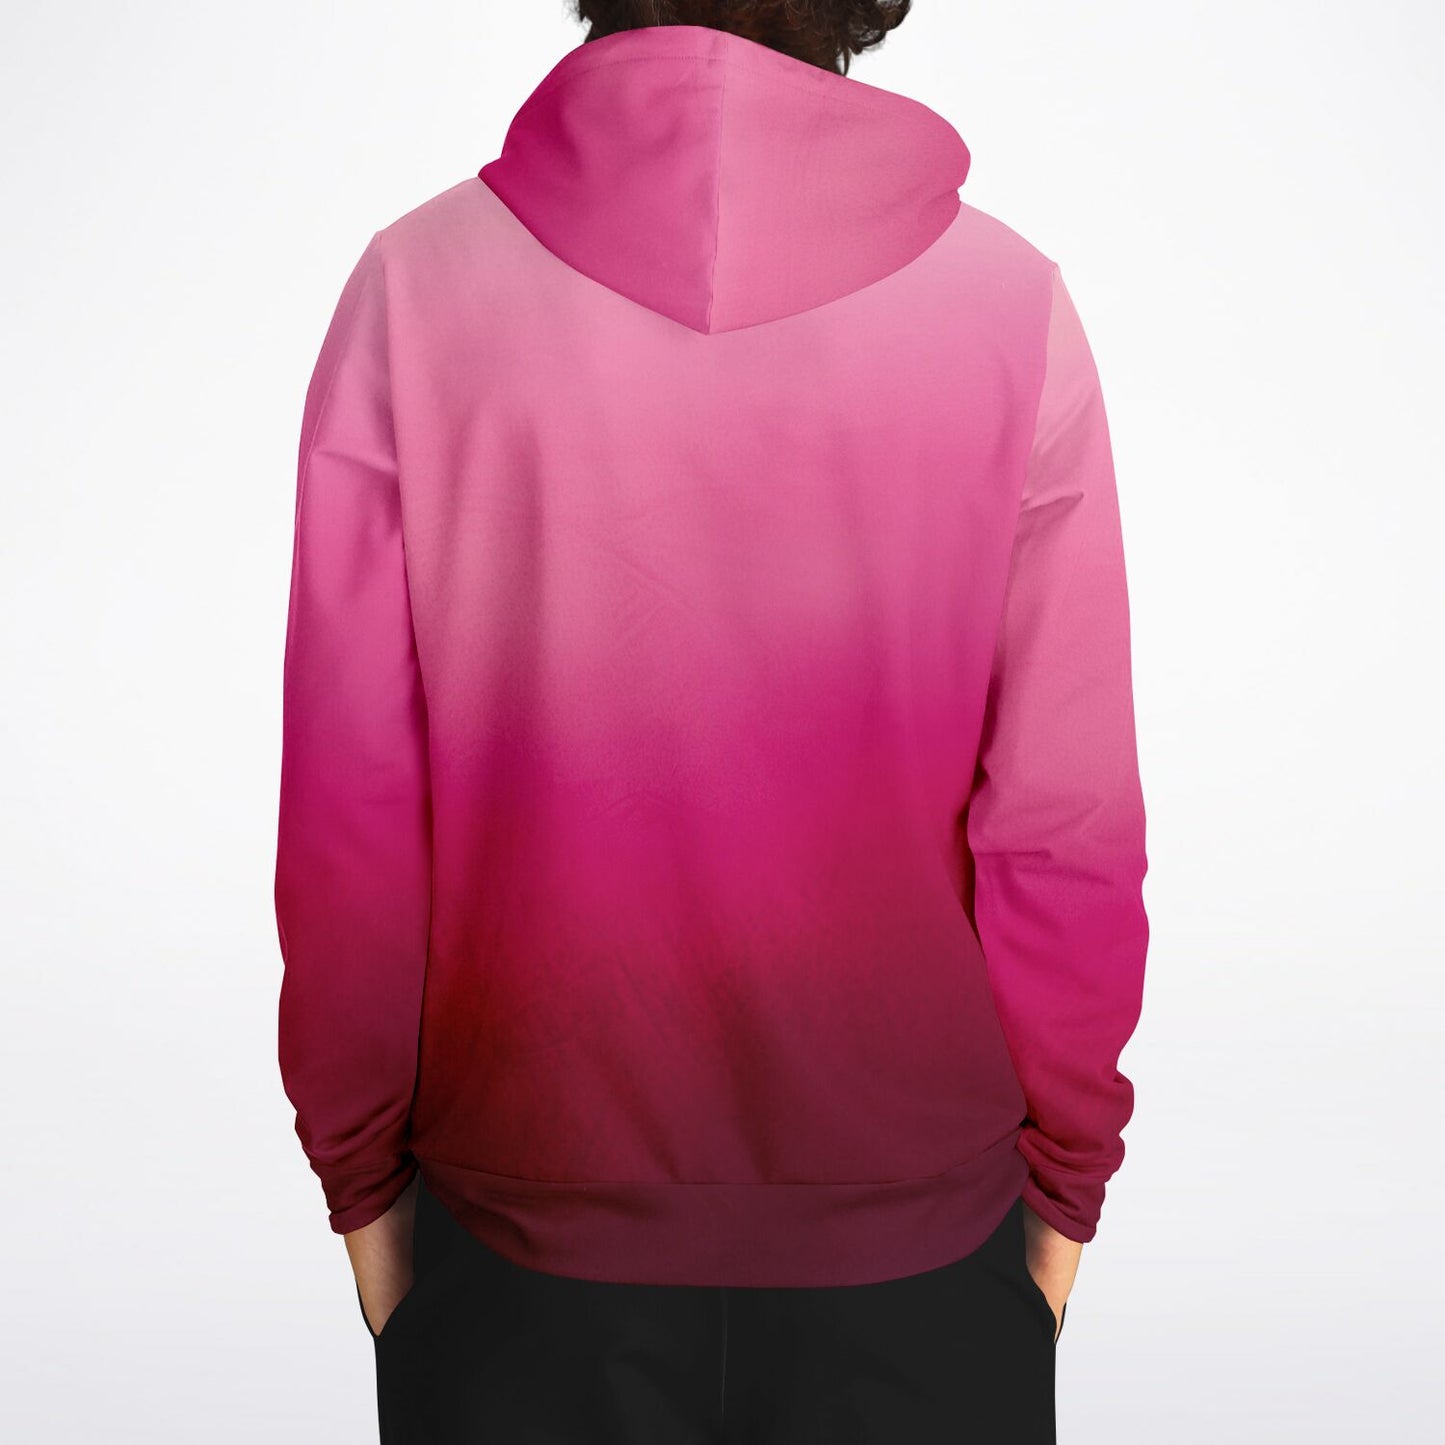 Red Pink Ombre Hoodie, Gradient Tie Dye Pullover Men Women Adult Aesthetic Graphic Cotton Hooded Sweatshirt with Pockets